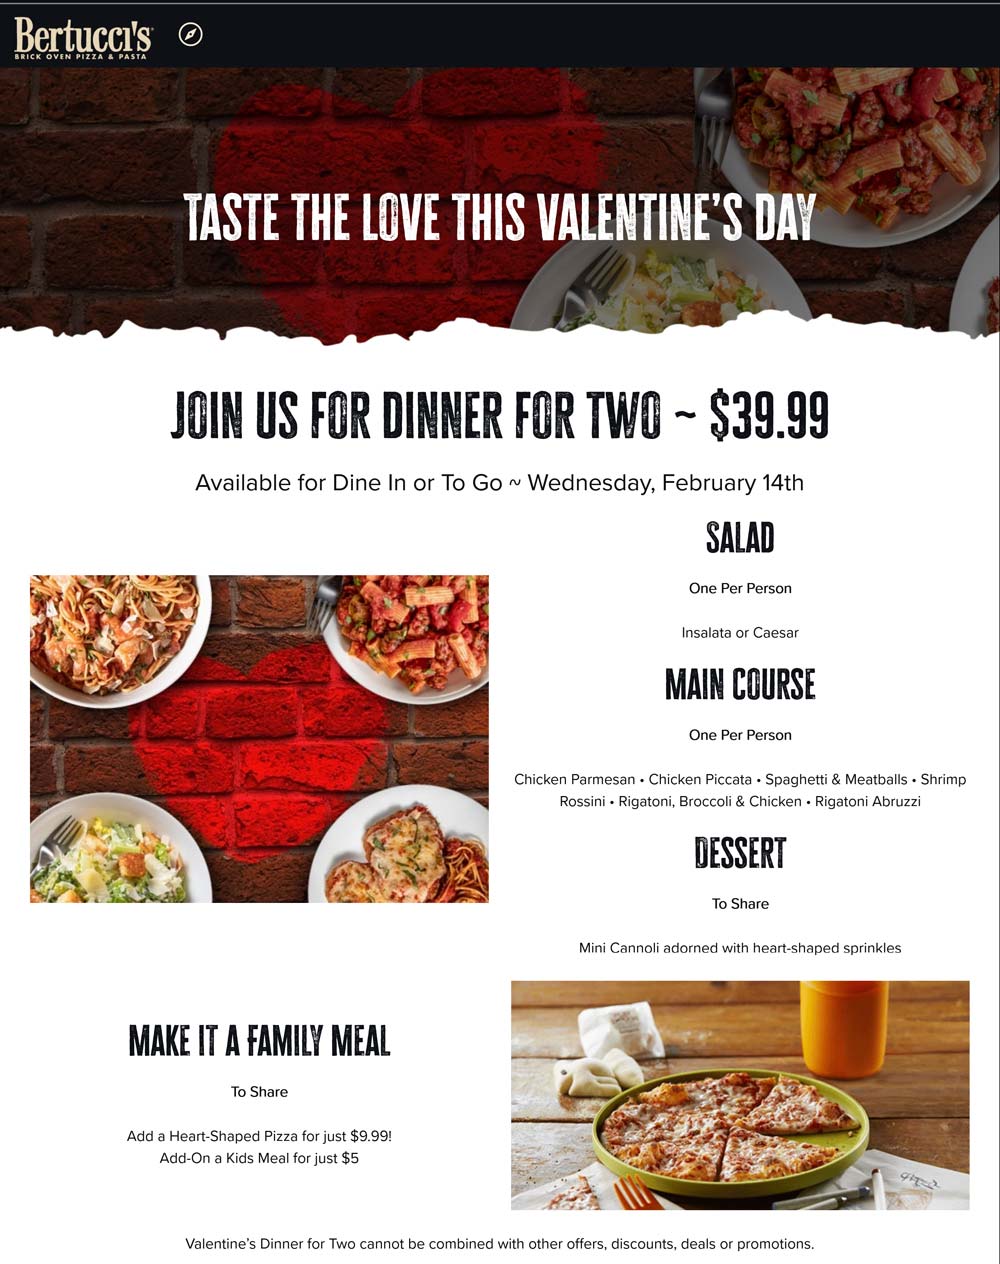 Bertuccis restaurants Coupon  Valentine dinner for 2 with salad + 2 entrees + dessert = $40 today at Bertuccis pizza & pasta, also for takeout #bertuccis 